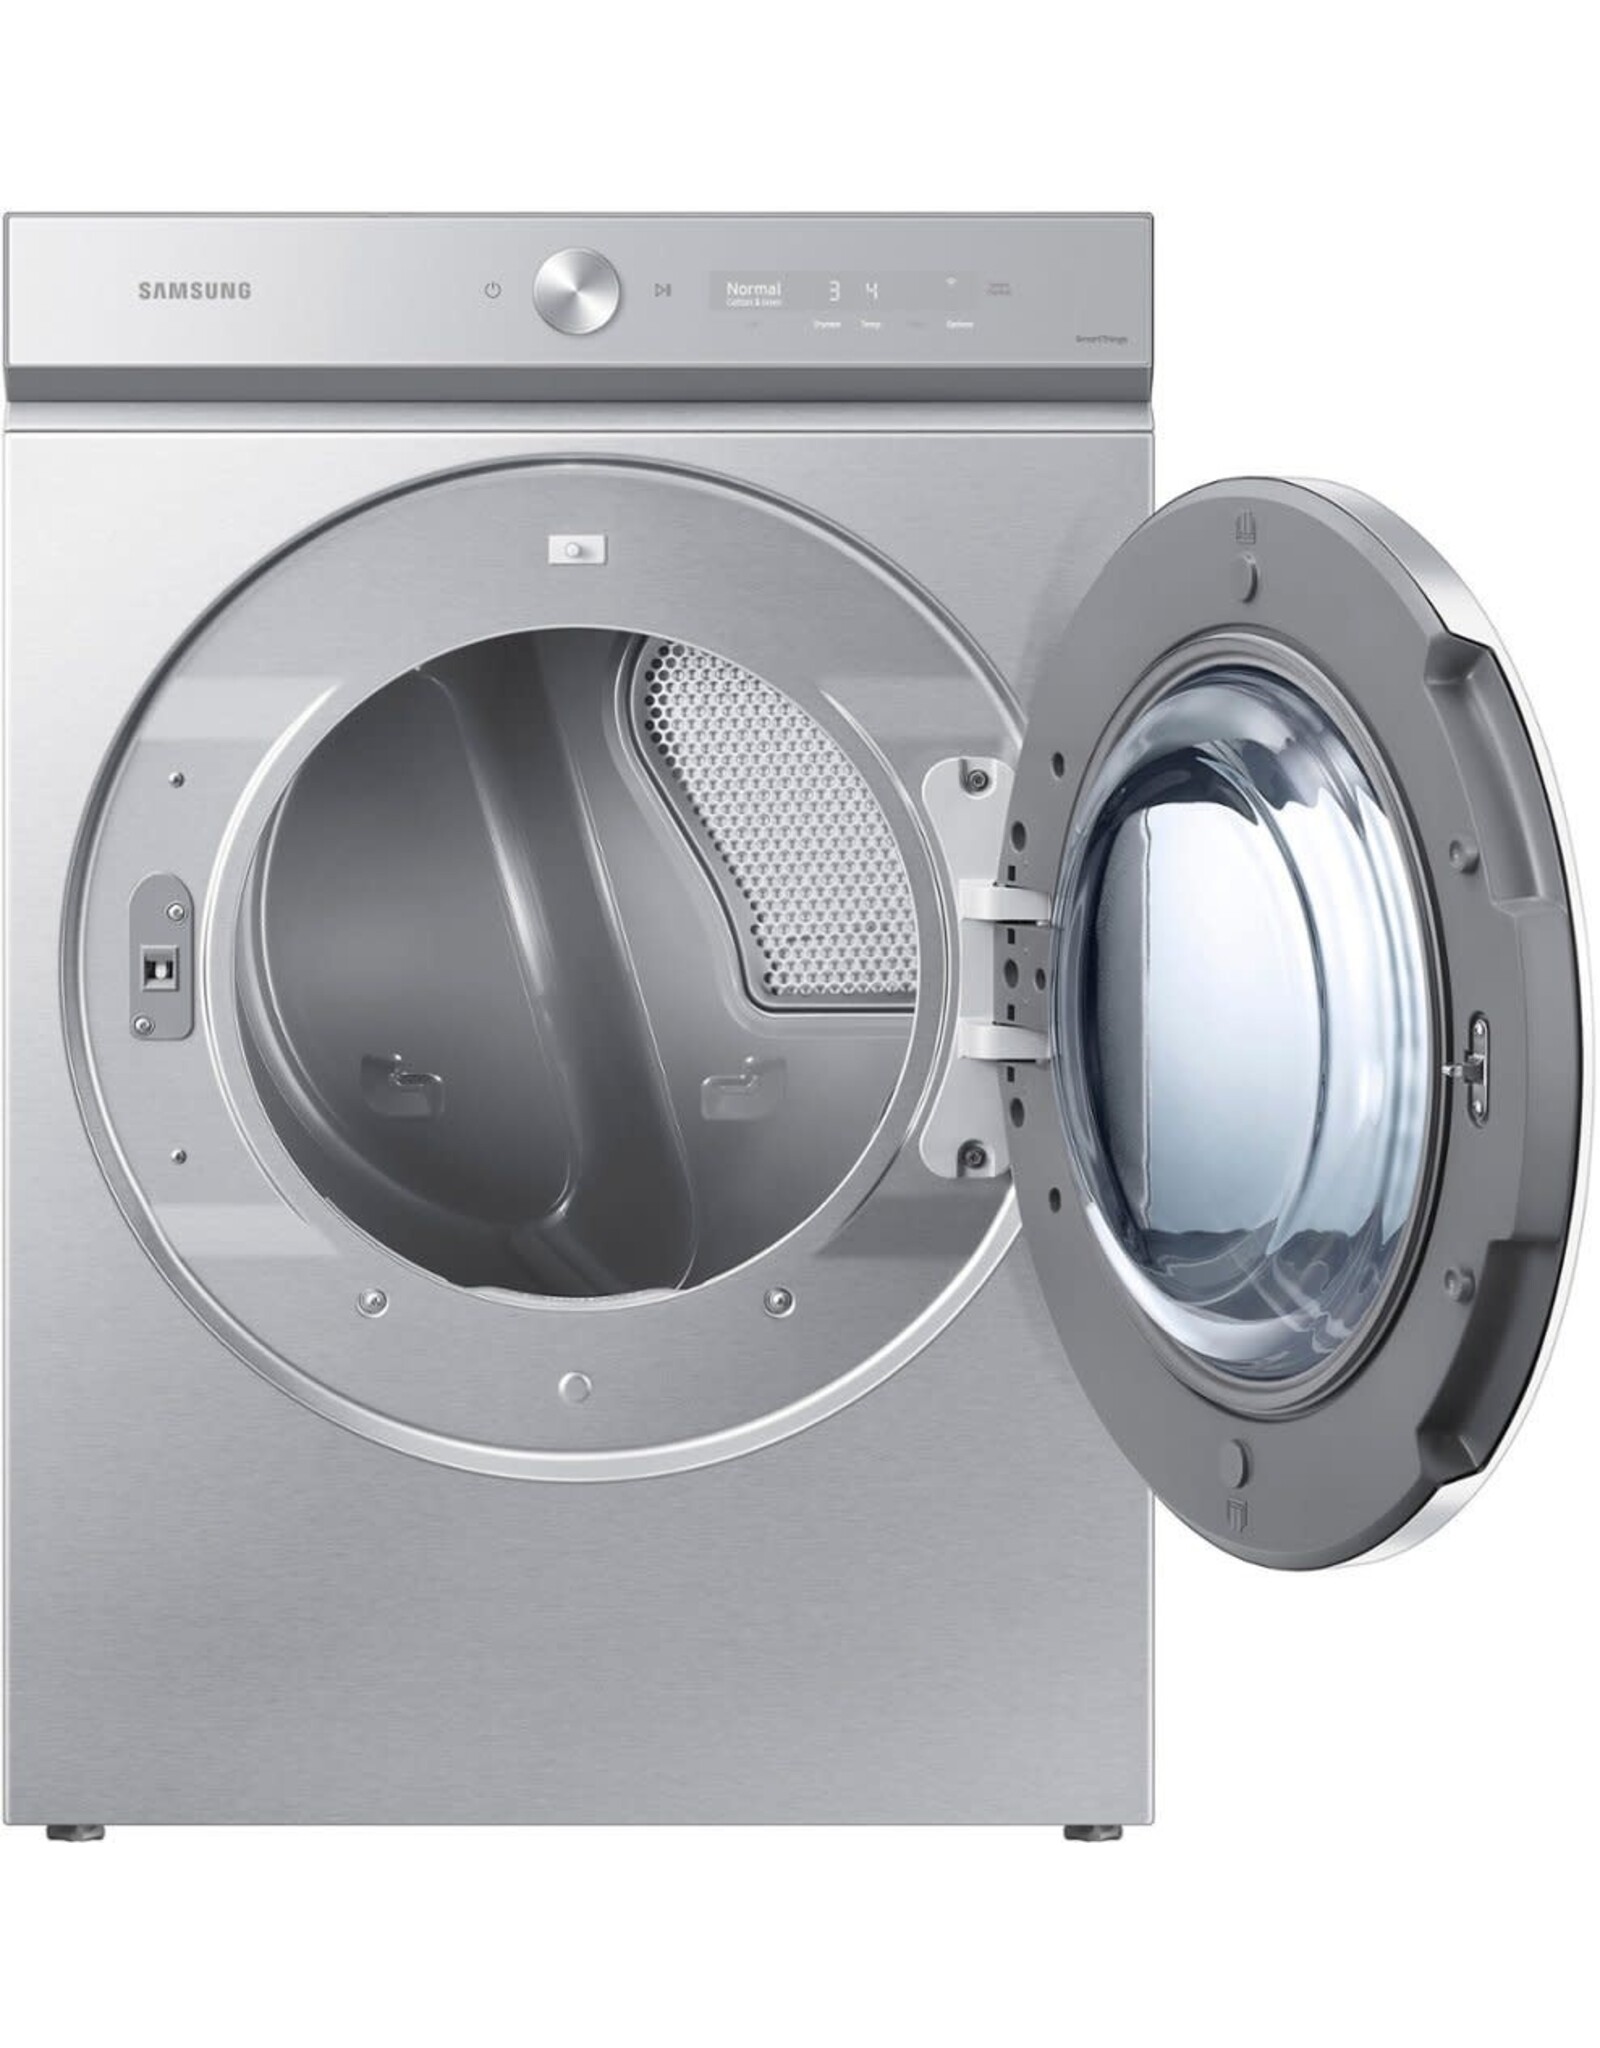 SAMSUNG Ck. DVE53BB8900T Samsung Bespoke 7.6 cu. ft. Vented Smart Electric Dryer in Silver Steel with AI Optimal Dry and Super Speed Dry